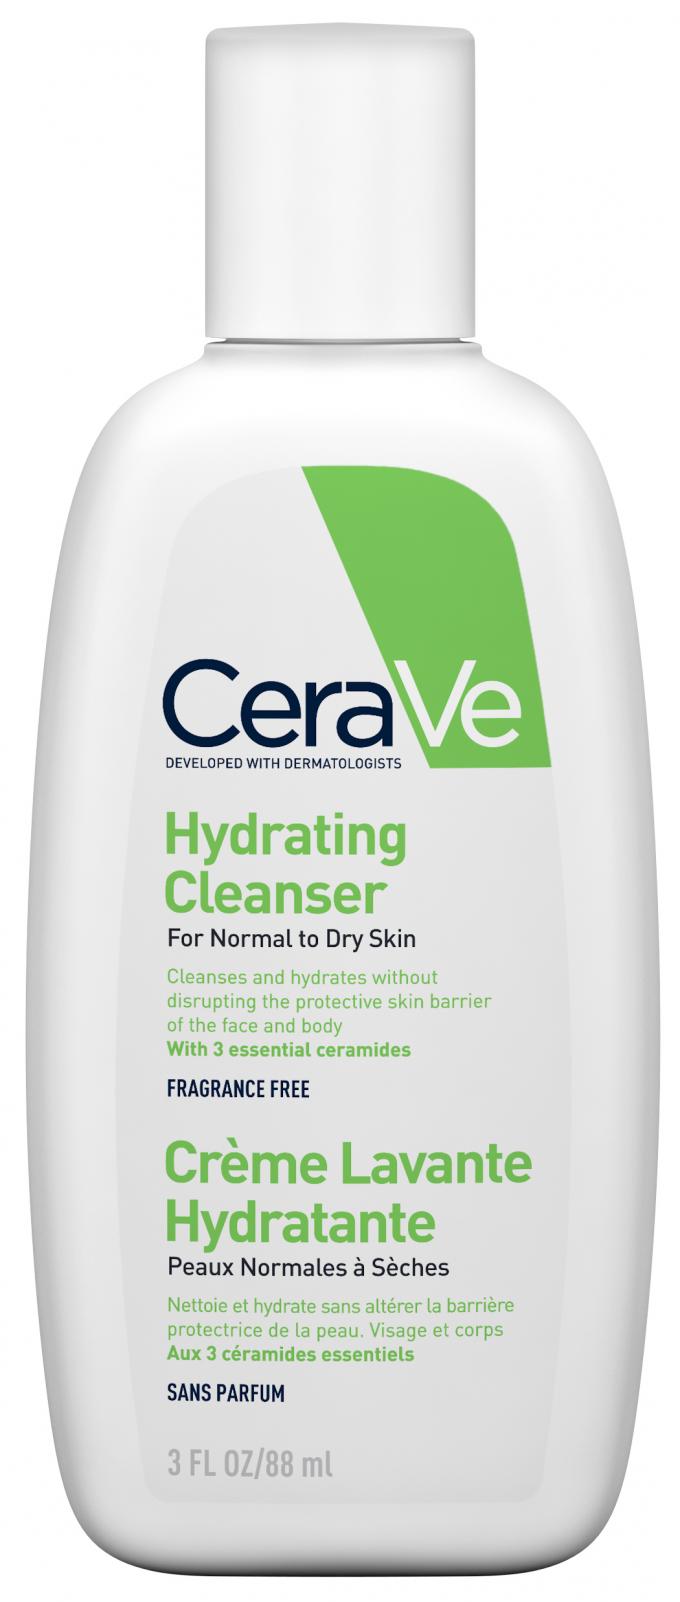 Hydrating cleanser - Cerave